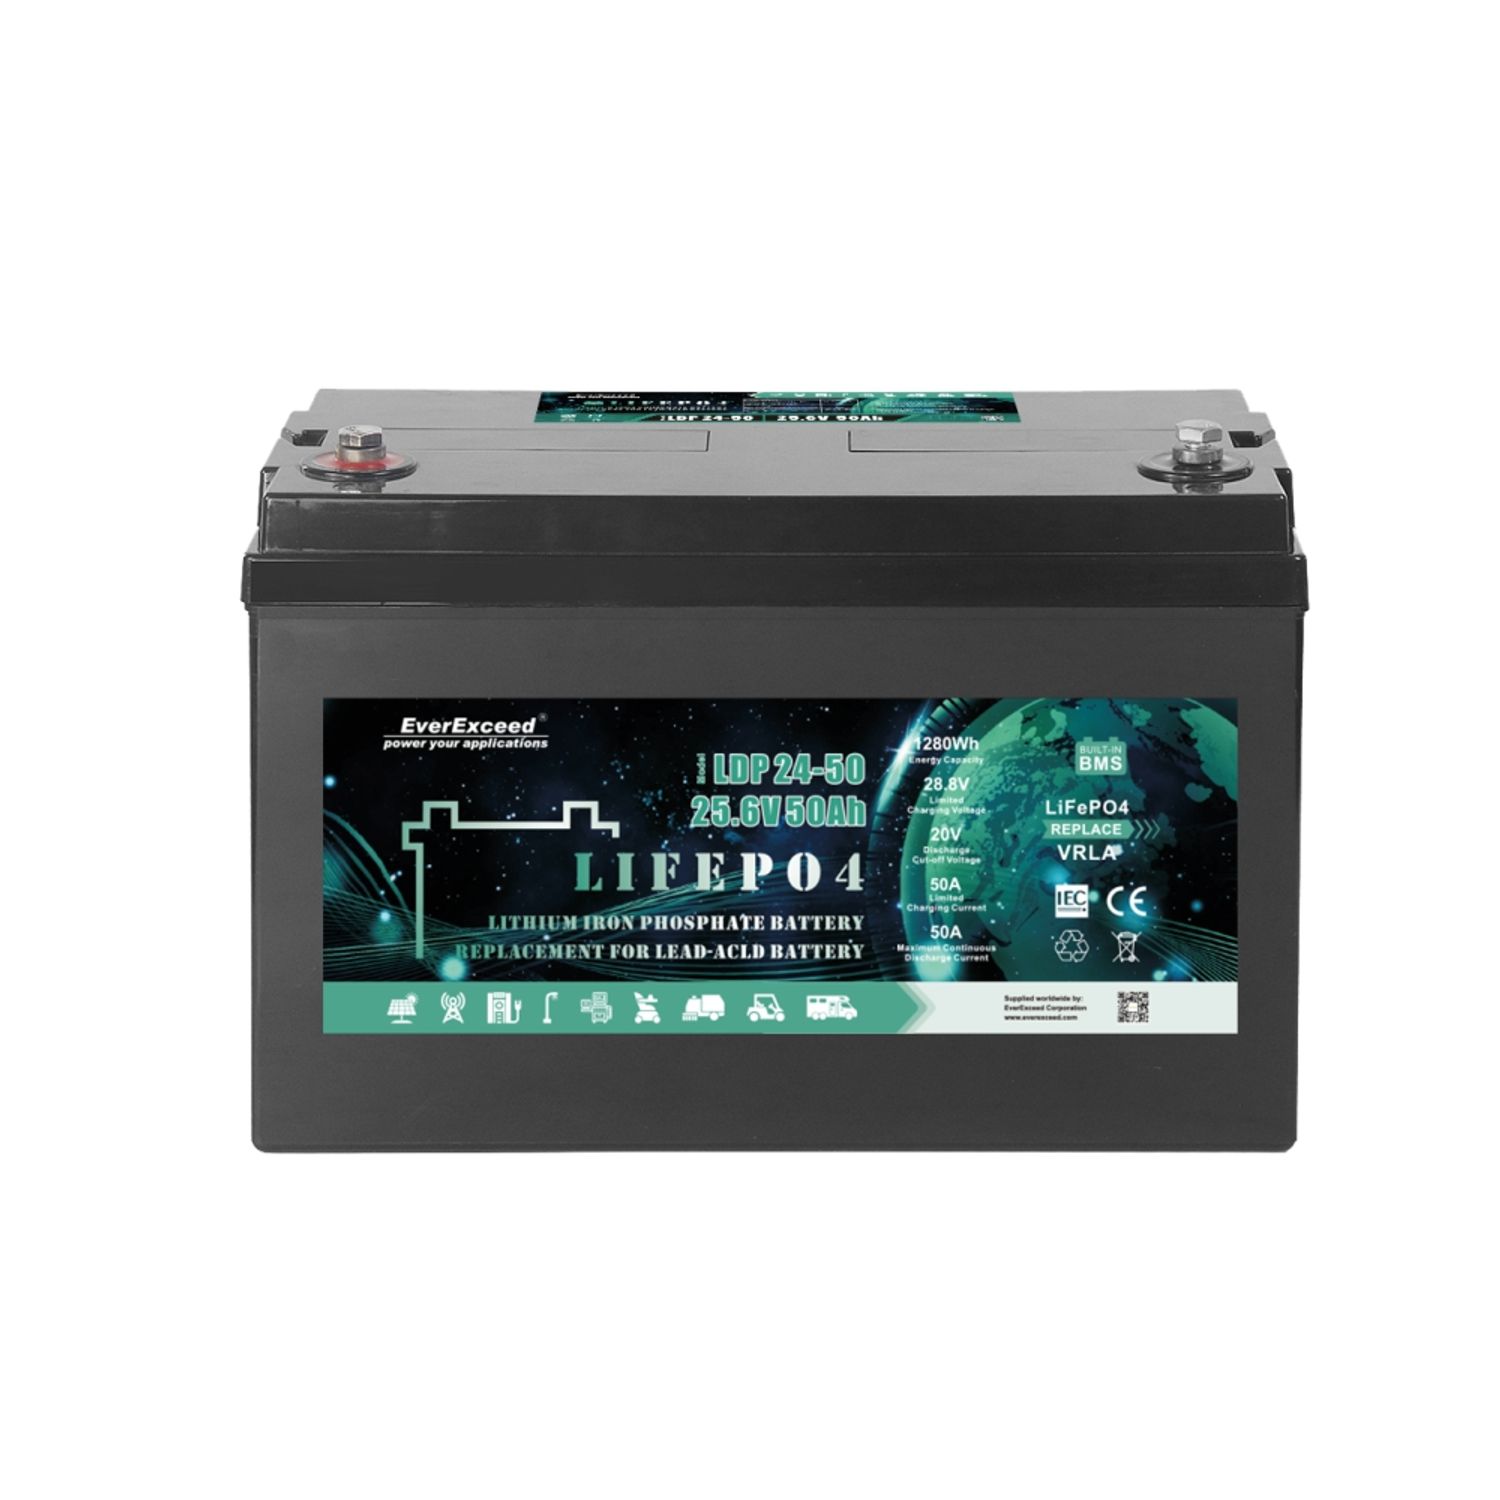 Everexceed 50ah 24v lifepo4 deep cycle battery for RV